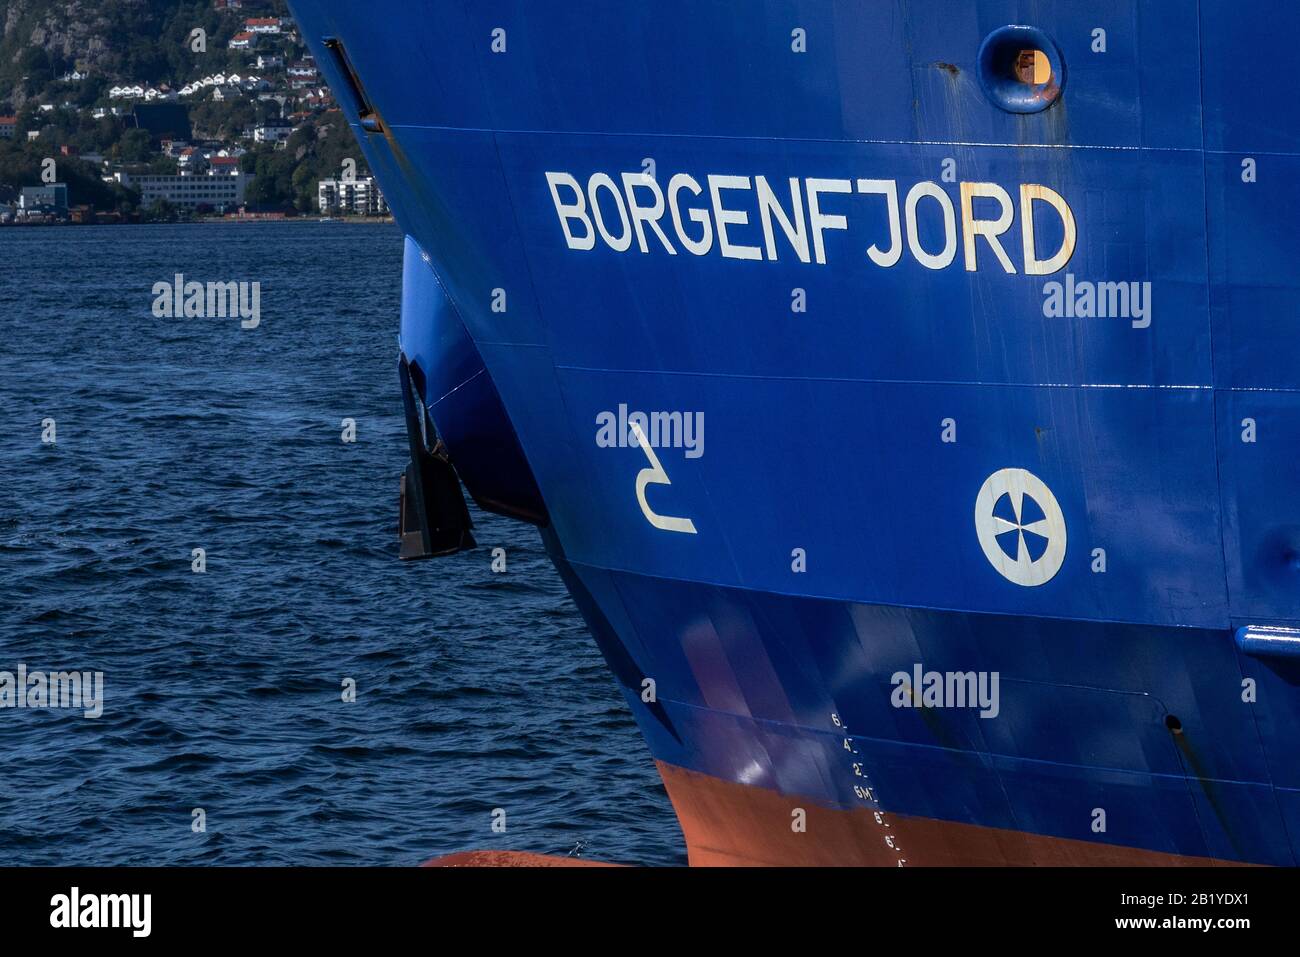 Name on bow of general cargo vessel Borgenfjord. Departing from the port of Bergen, Norway. Vessel ex Eiland ex Huelin Dispatch. Stock Photo